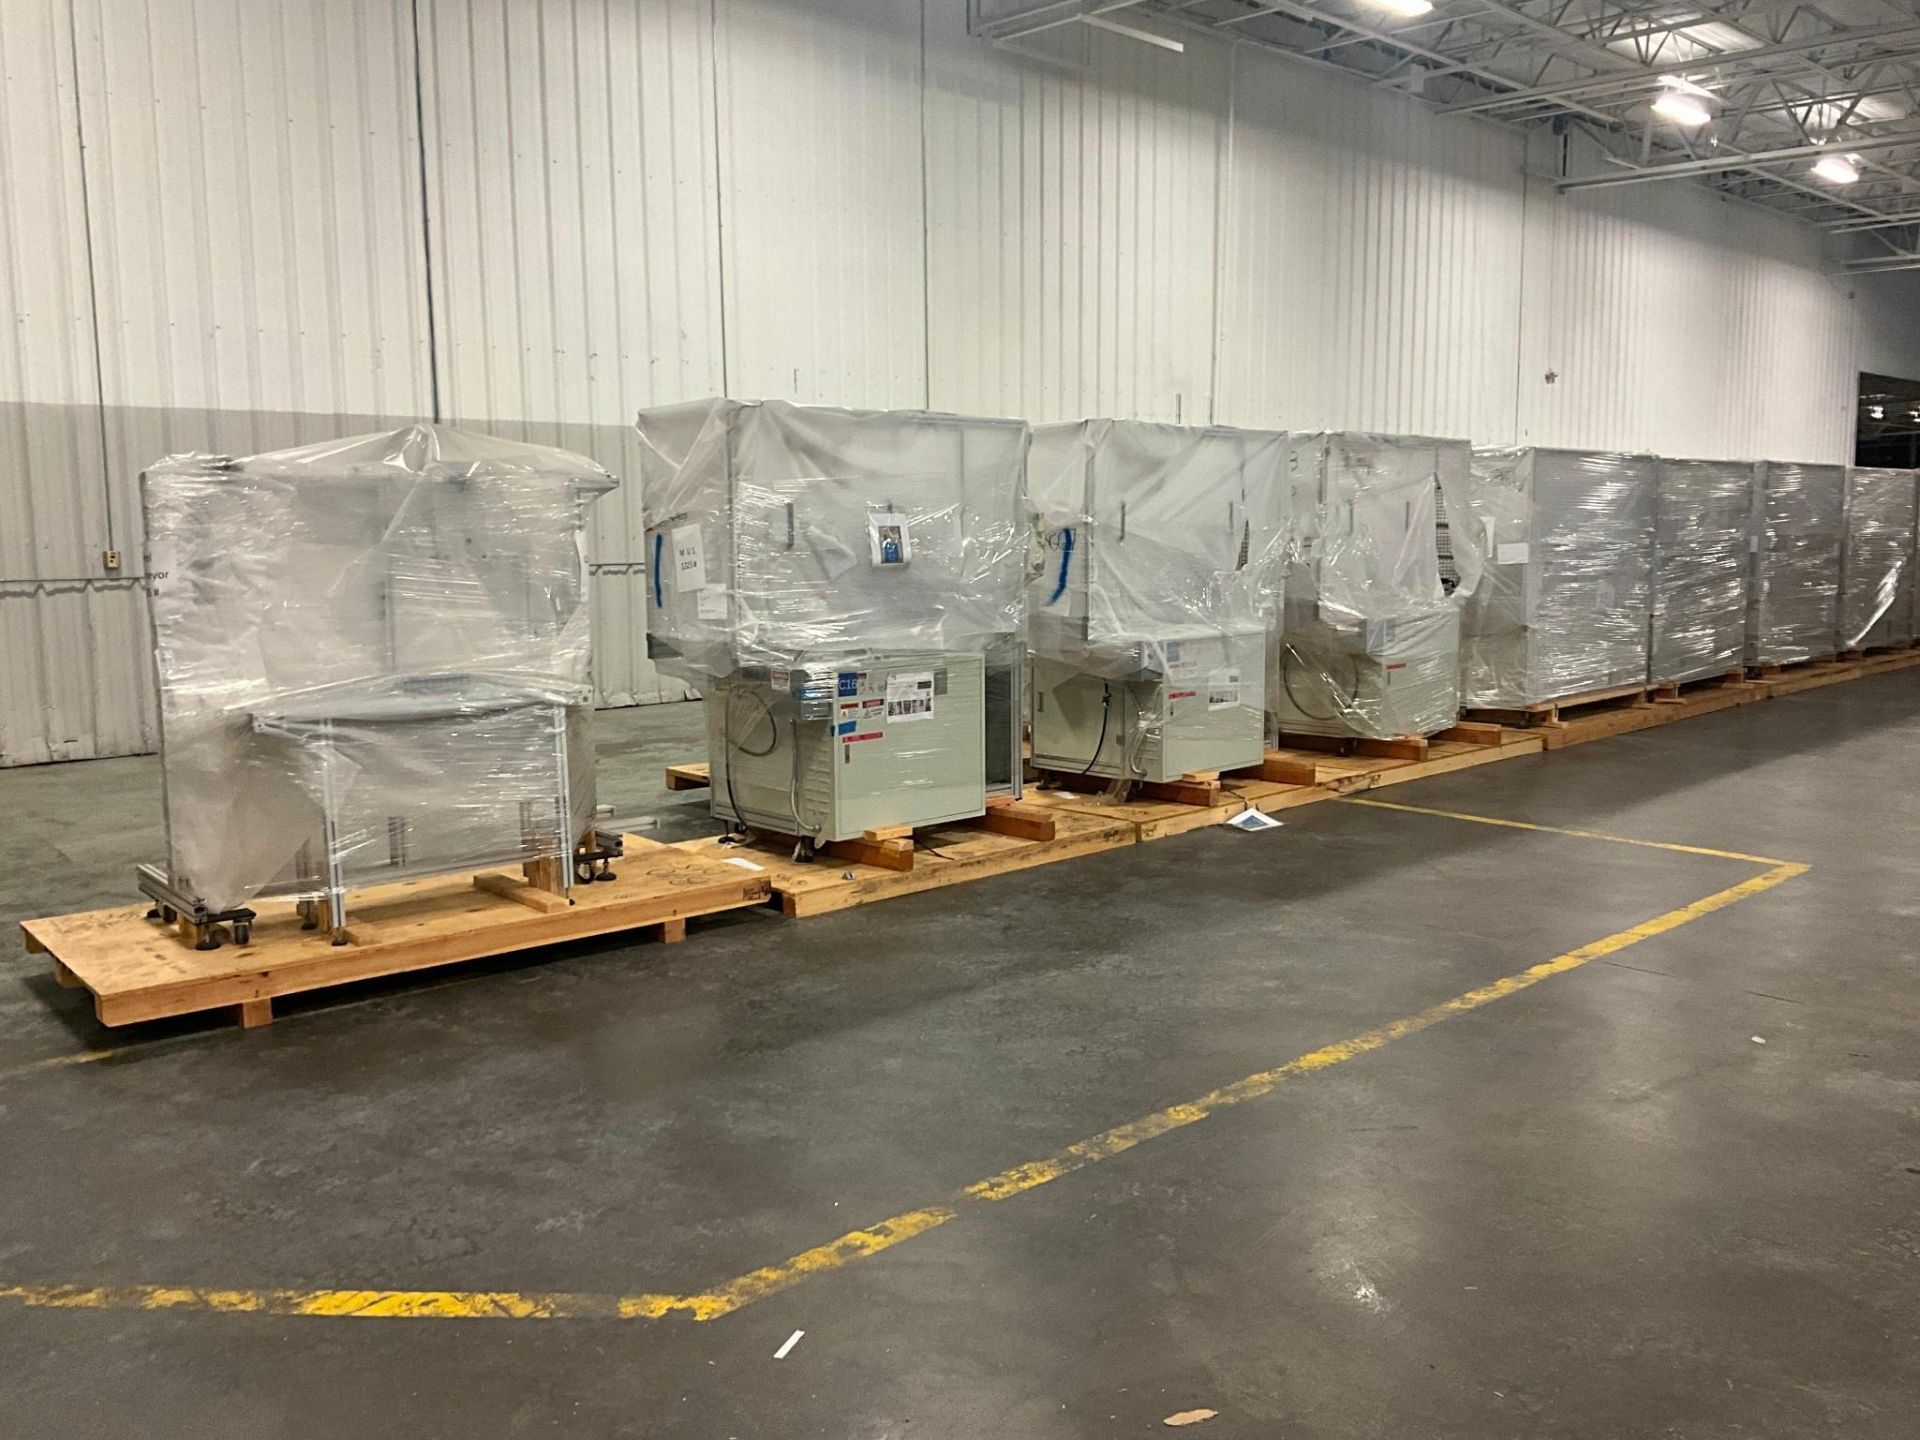 (38) 2020 KYD AUTOMATIC MASK MACHINE WITH ROLL BACK,CUTTER,EARLOOP WELDER, & CONVEYOR - CRATED - Image 11 of 62